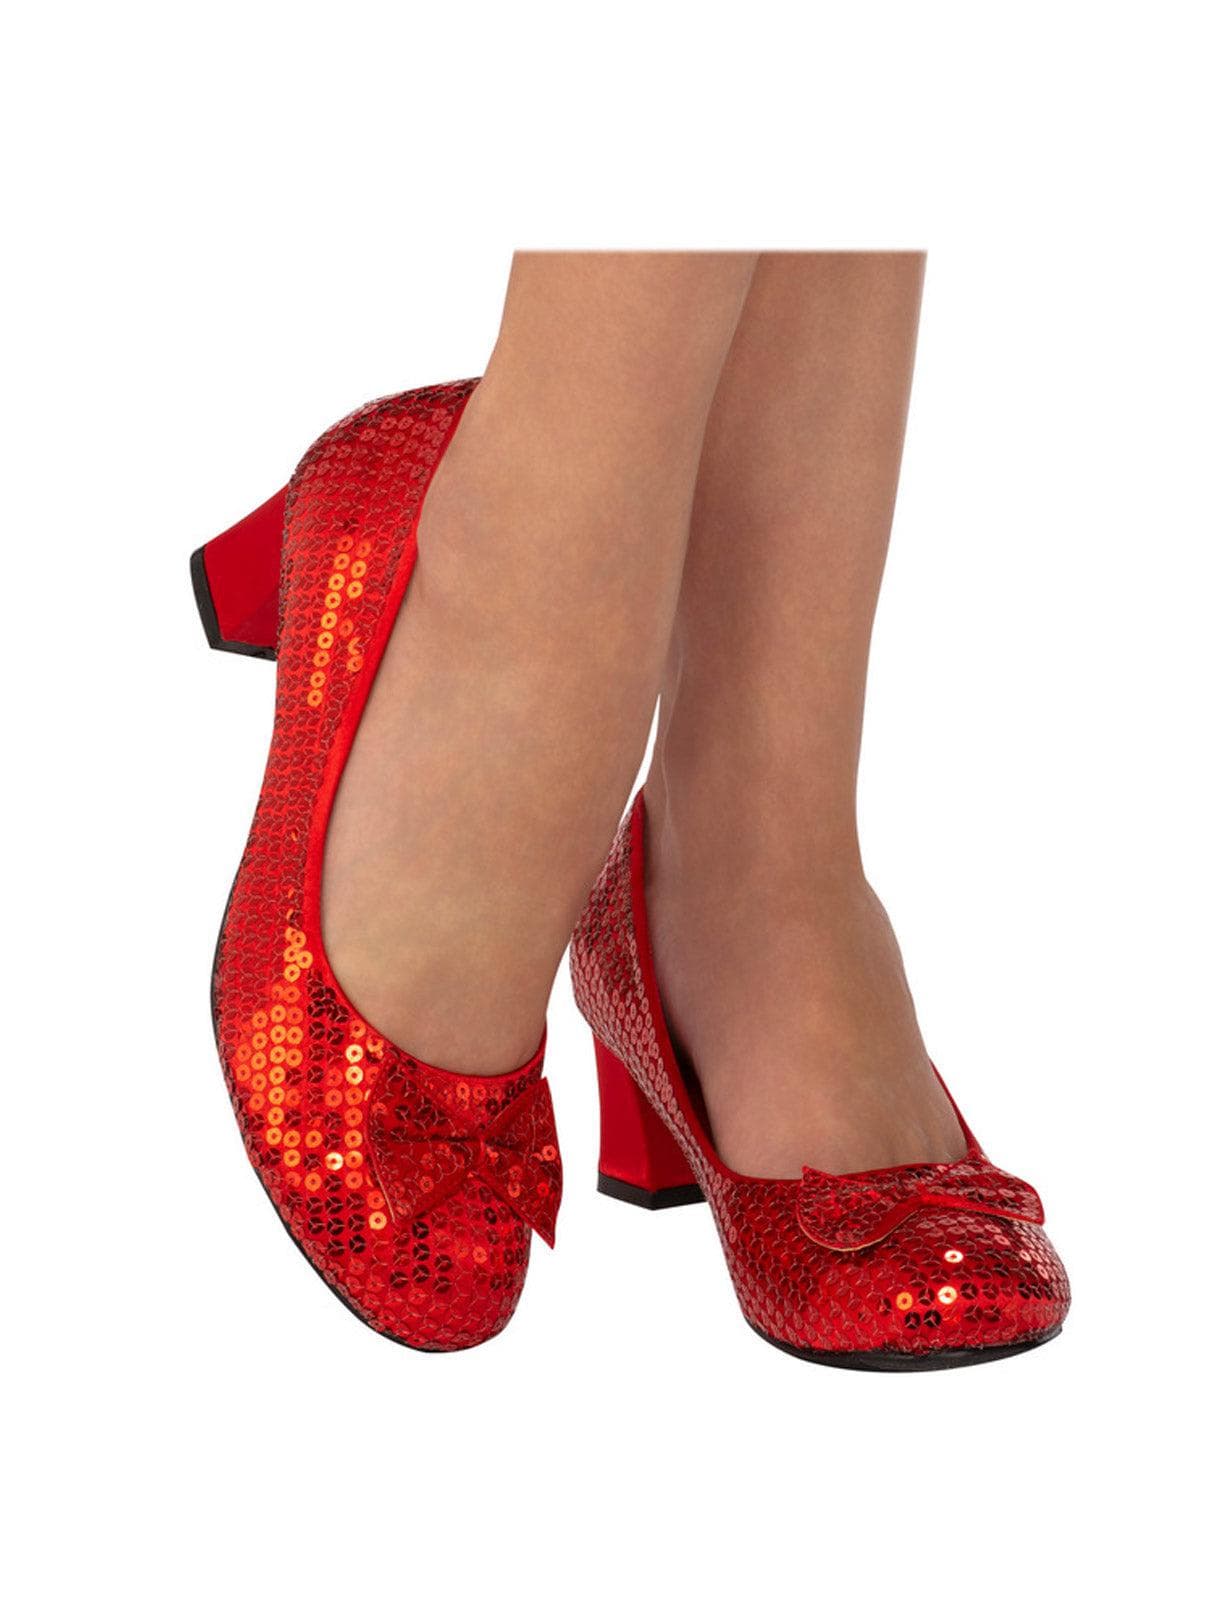 Adult Red Sequin Dorothy Heeled Shoes - costumes.com